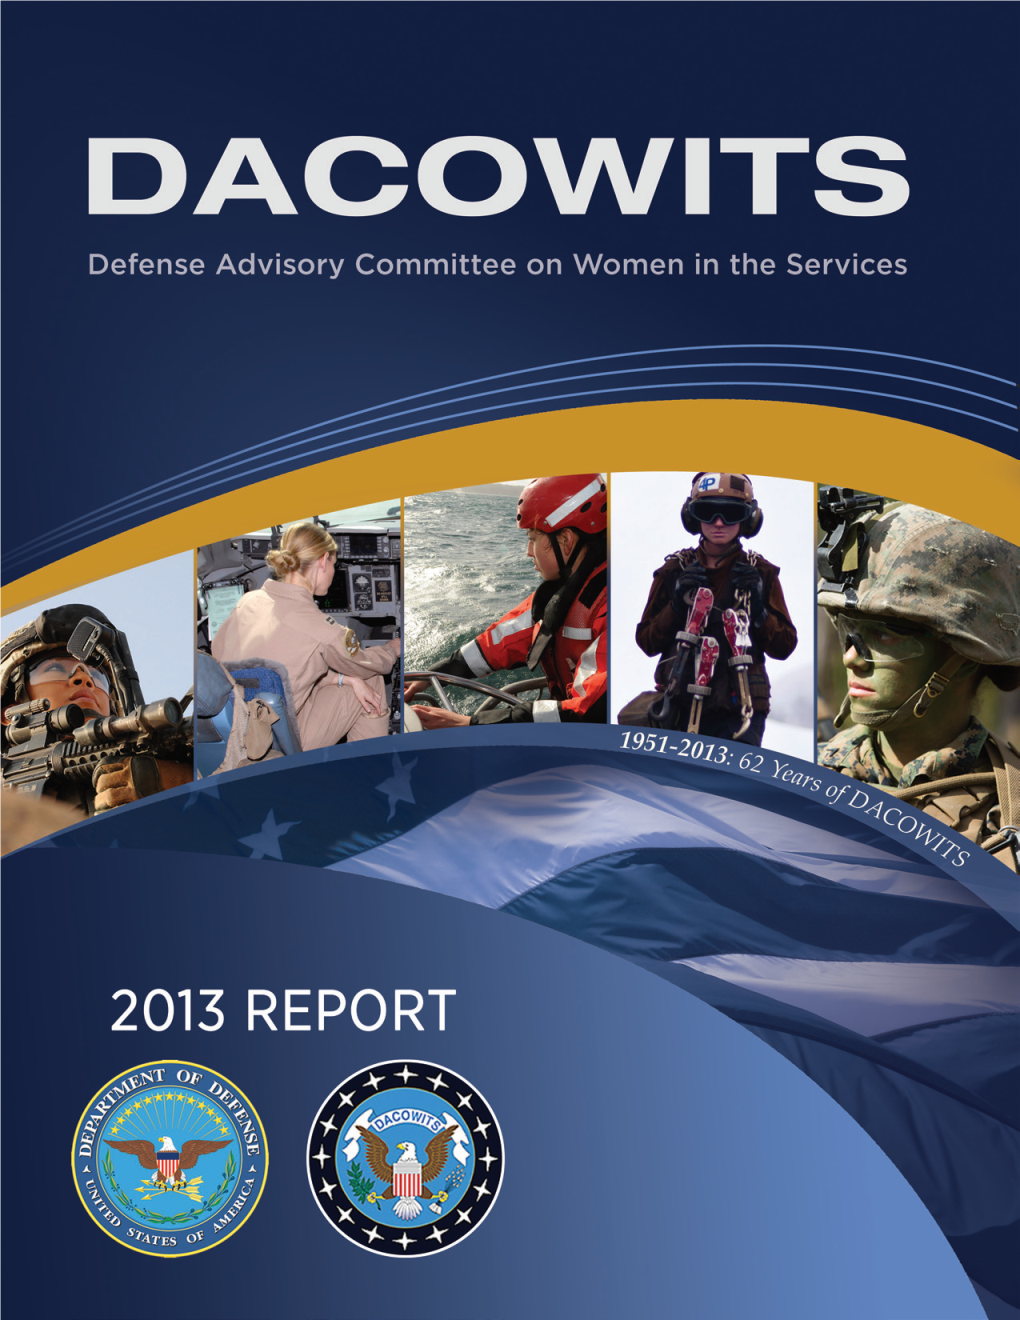 Dacowits 2013 Report